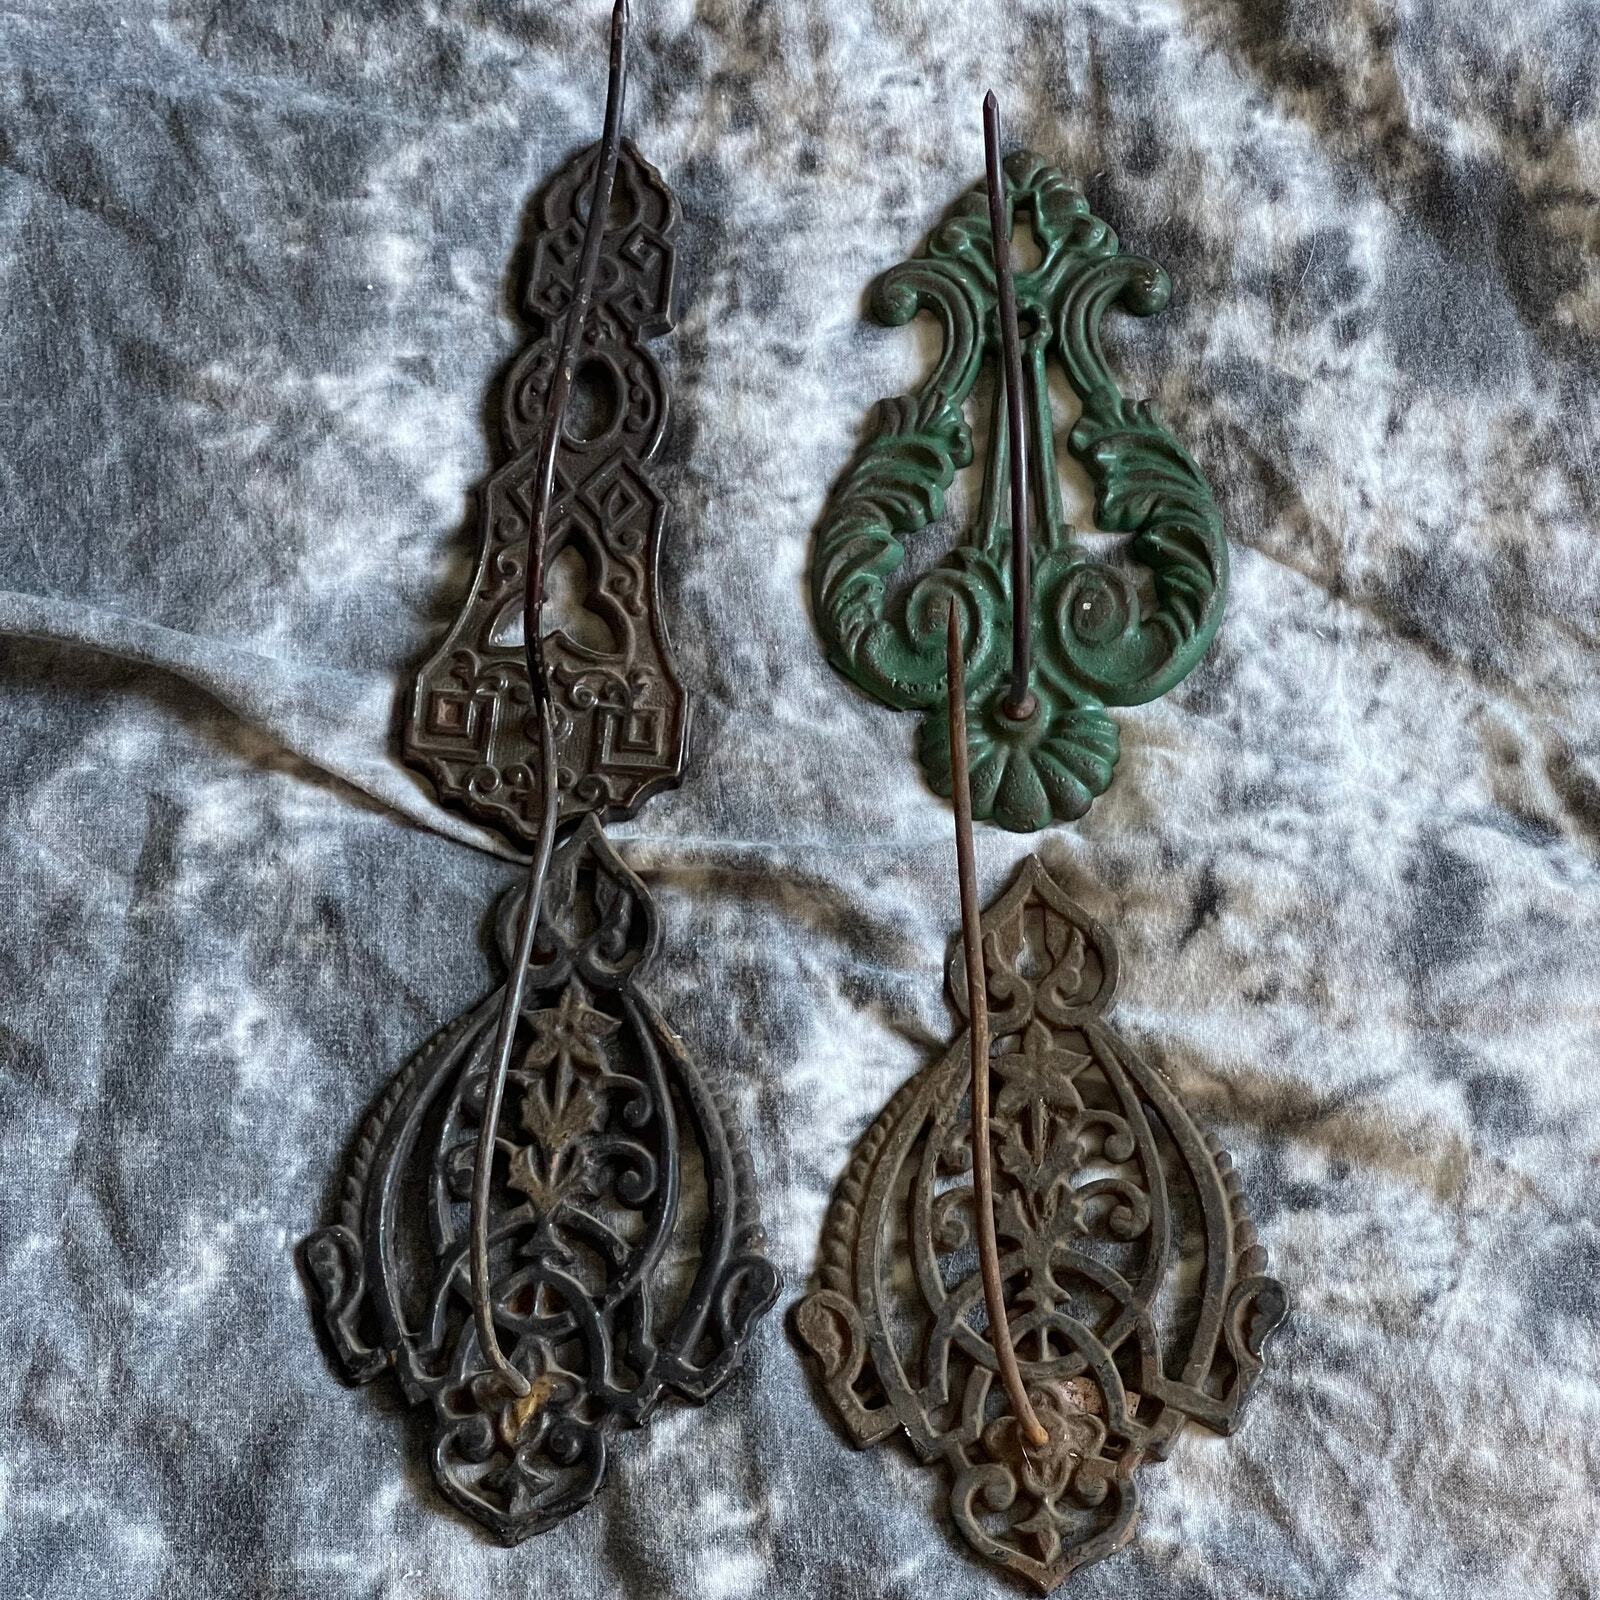 Set of 4 Cast Iron Hanging Receipt Hooks from 1800’s-1920’s Vintage Victorian